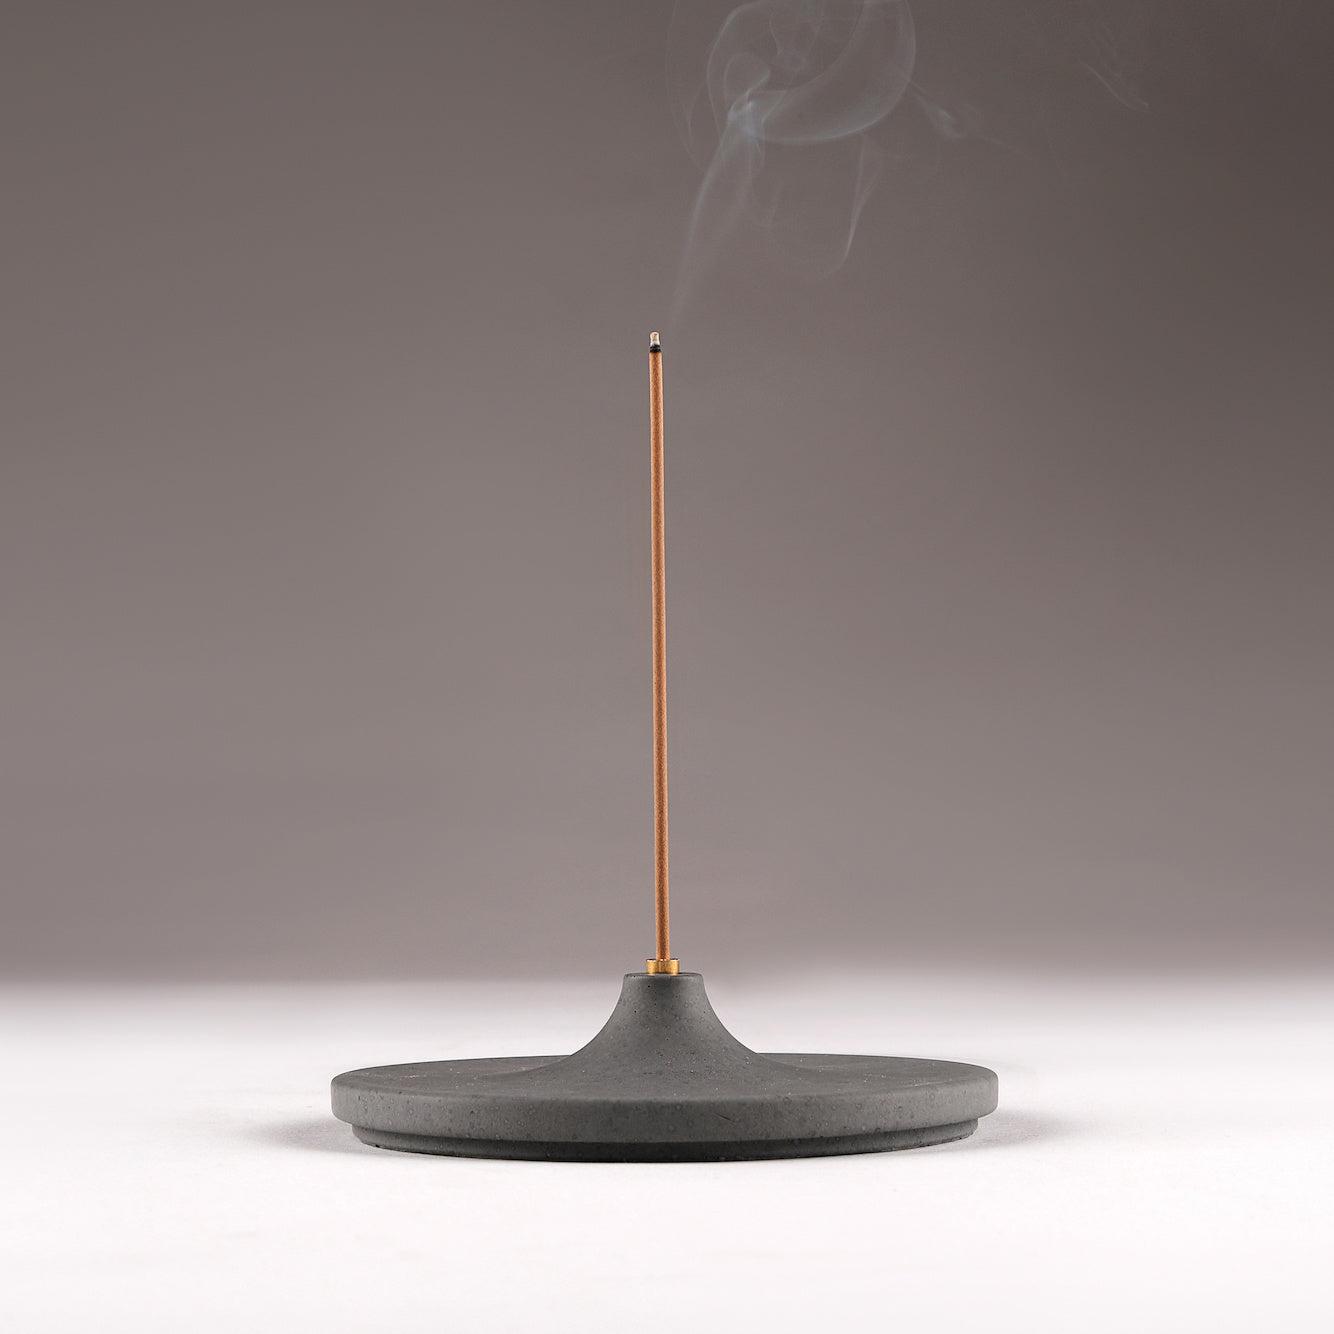 Minimal Incense Holder Disk with a burning incense and smoke flowing